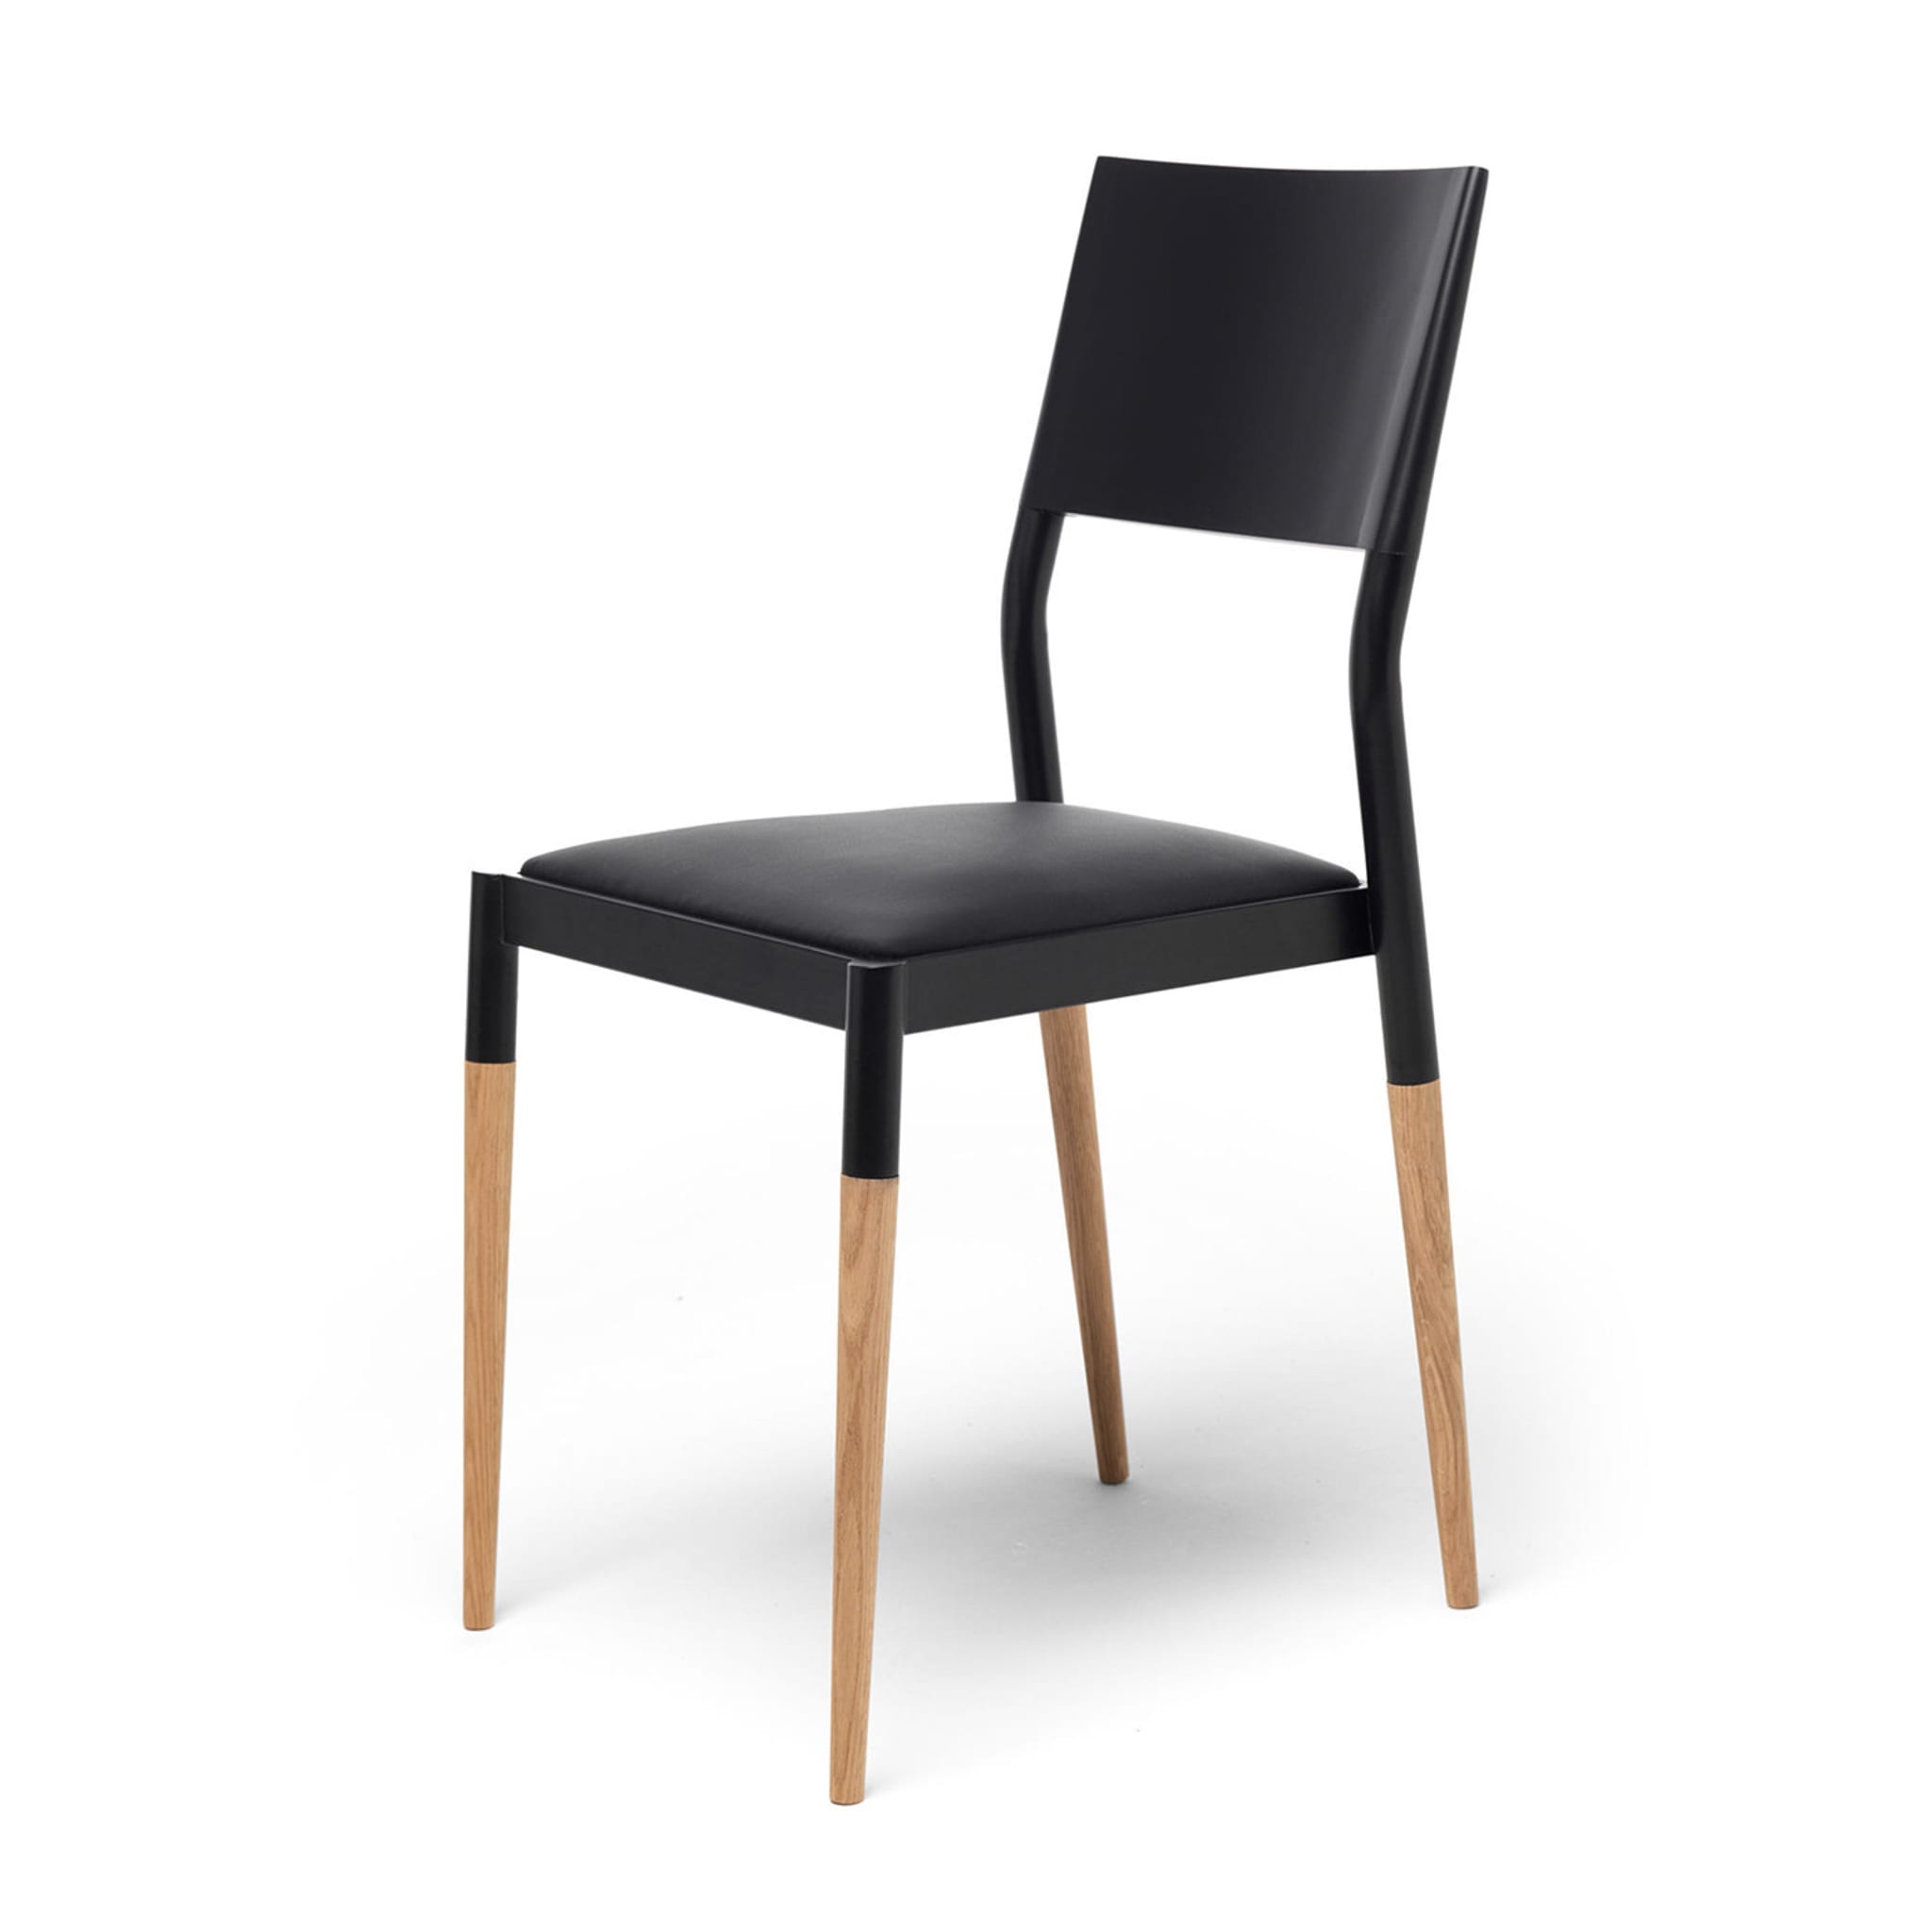 Bic Set of 2 Chairs - Alternative view 1